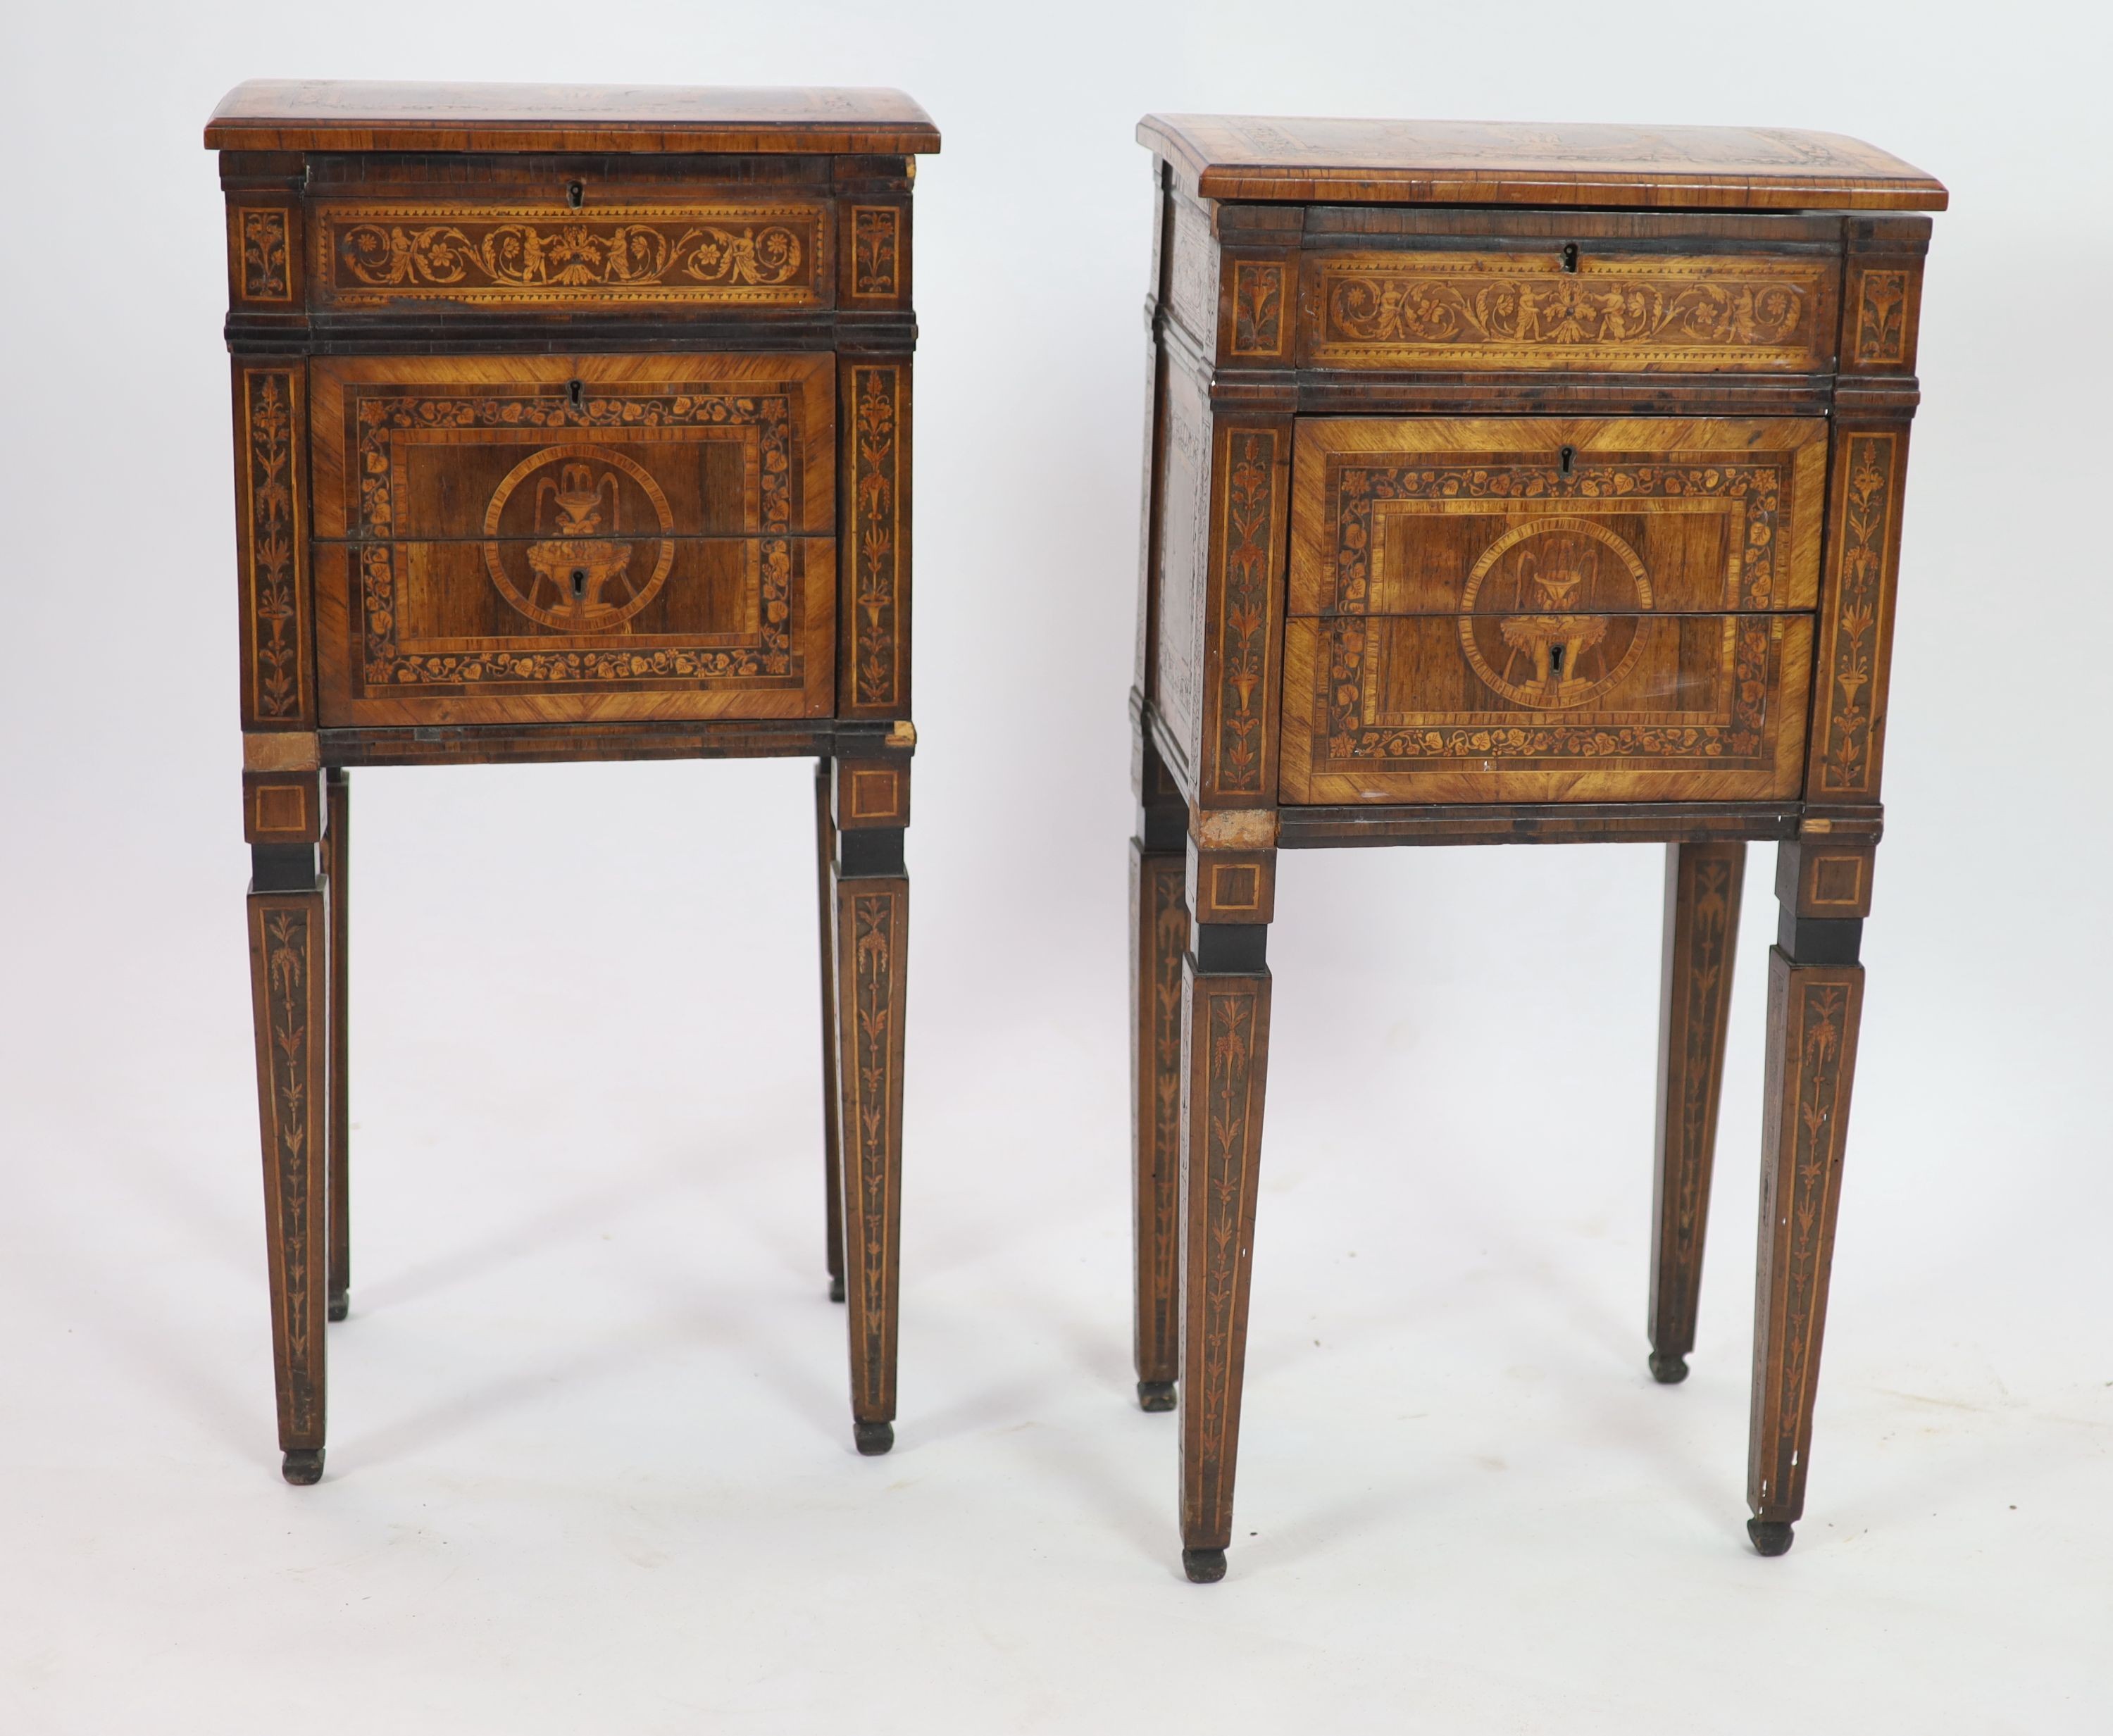 A pair of 18th century Italian Milanese walnut and marquetry neo-classical 'Comodini' in the manner of Giuseppe Maggiolini, W 41cm D 31cm H 81cm